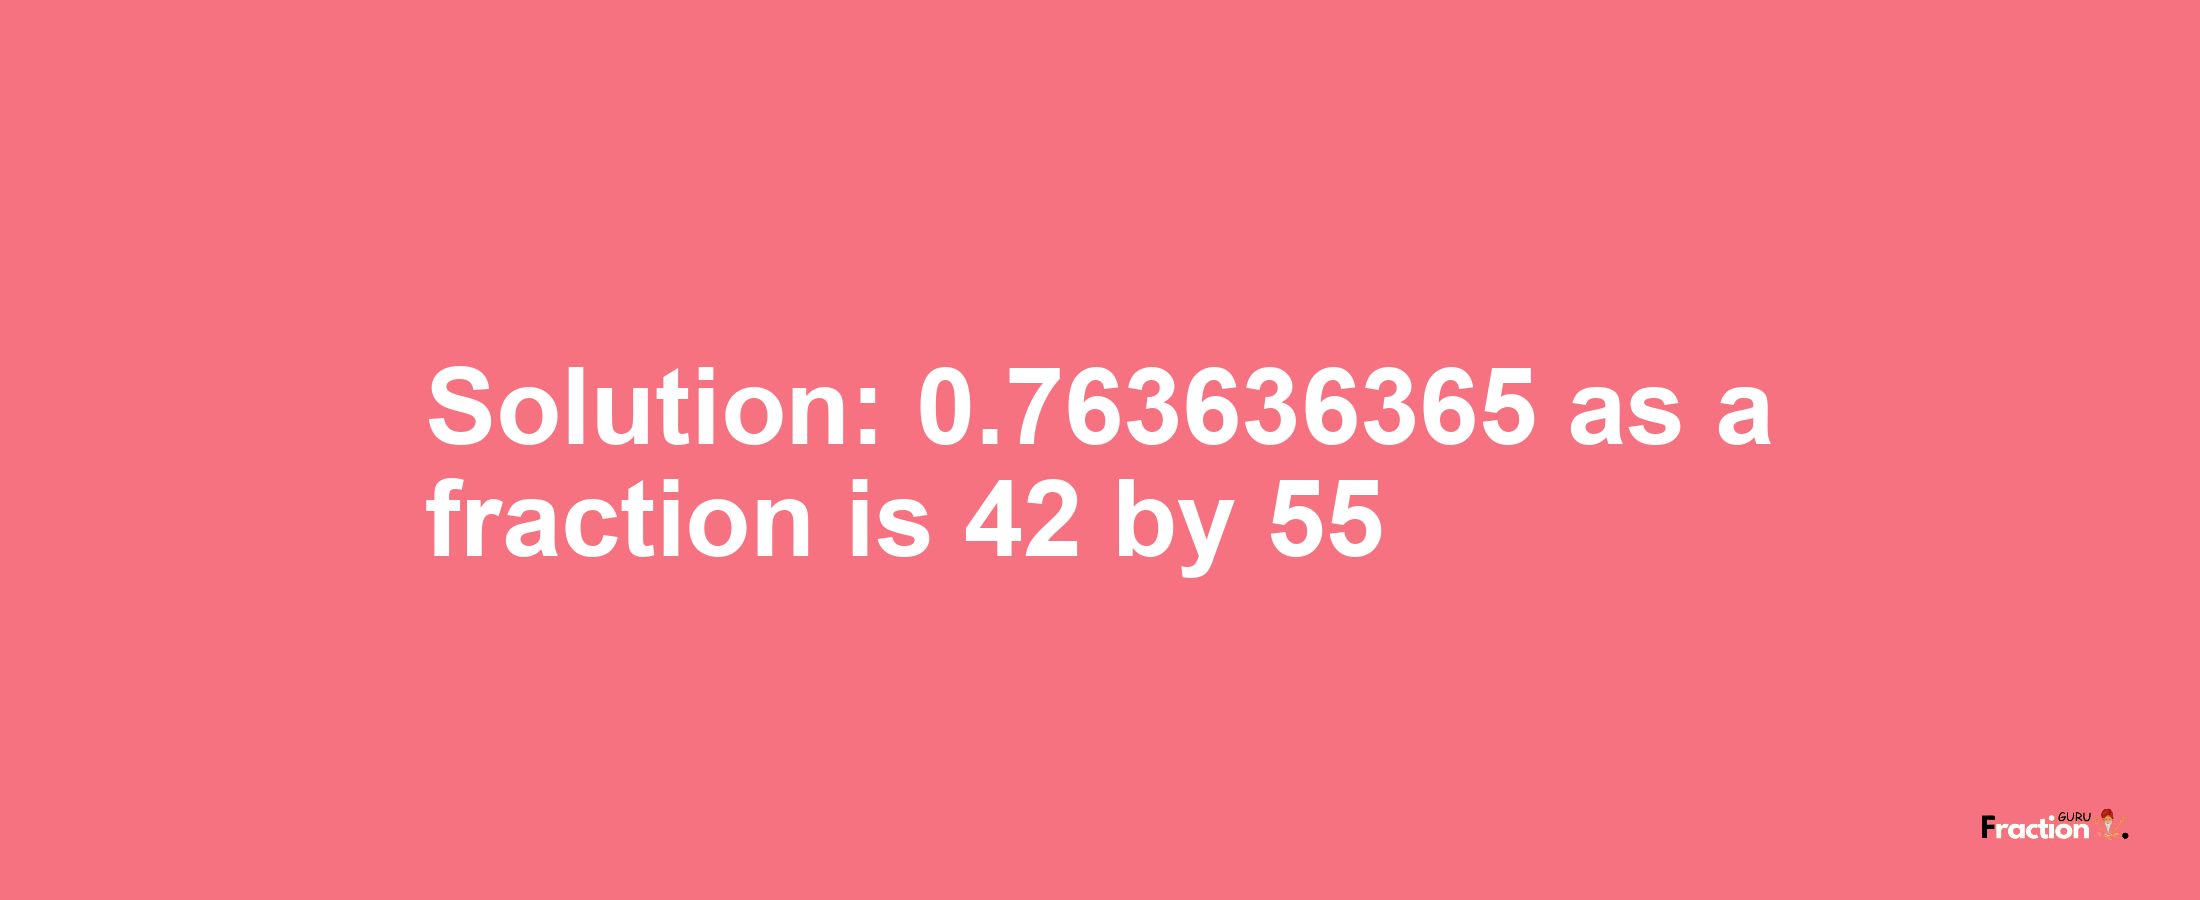 Solution:0.763636365 as a fraction is 42/55